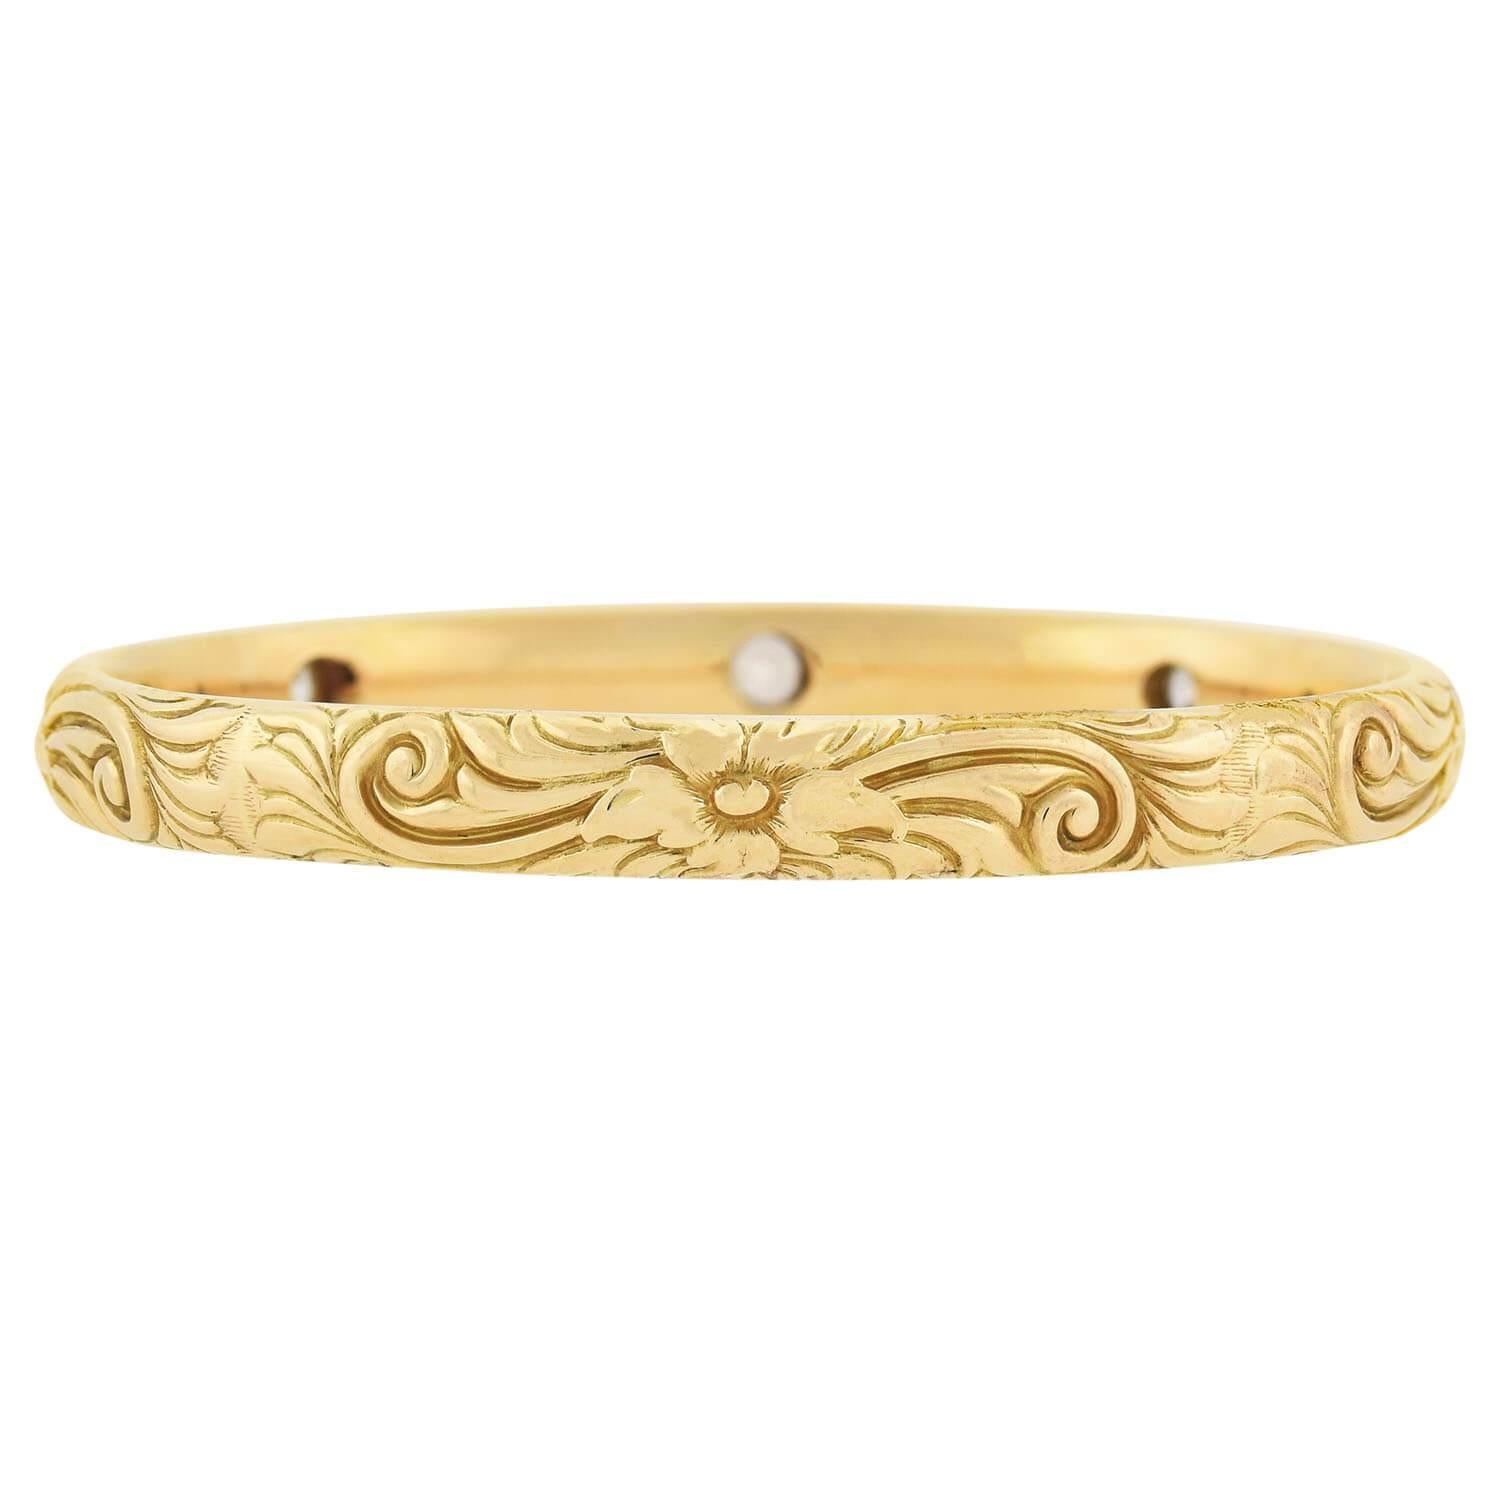 An exquisite bangle bracelet from the Art Nouveau (ca1909) era! This slip-on style bangle is crafted in 14kt gold and features a lovely repousse motif. The flowing design covers the entire surface of the bracelet, creating a graceful pattern of